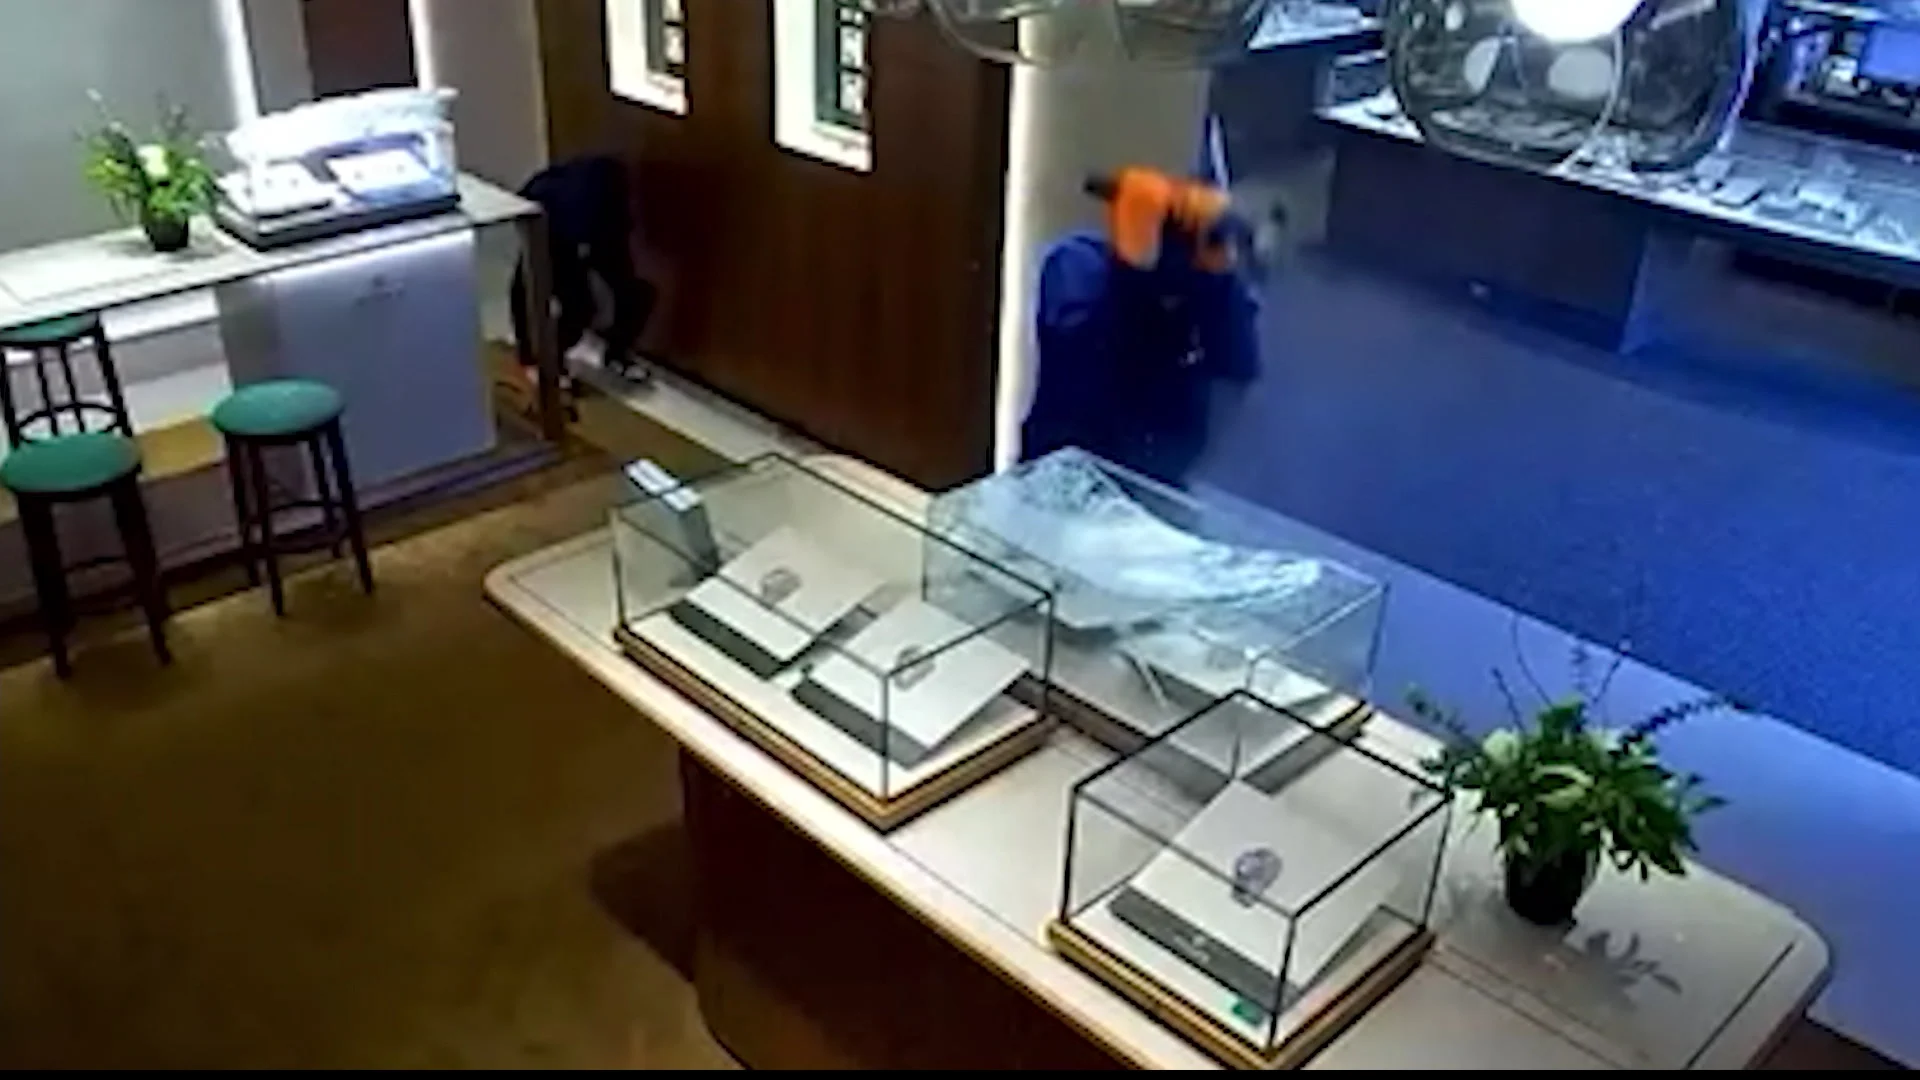 Police: Jewelry stolen during smash-and-grab burglary at Lux Bond & Green